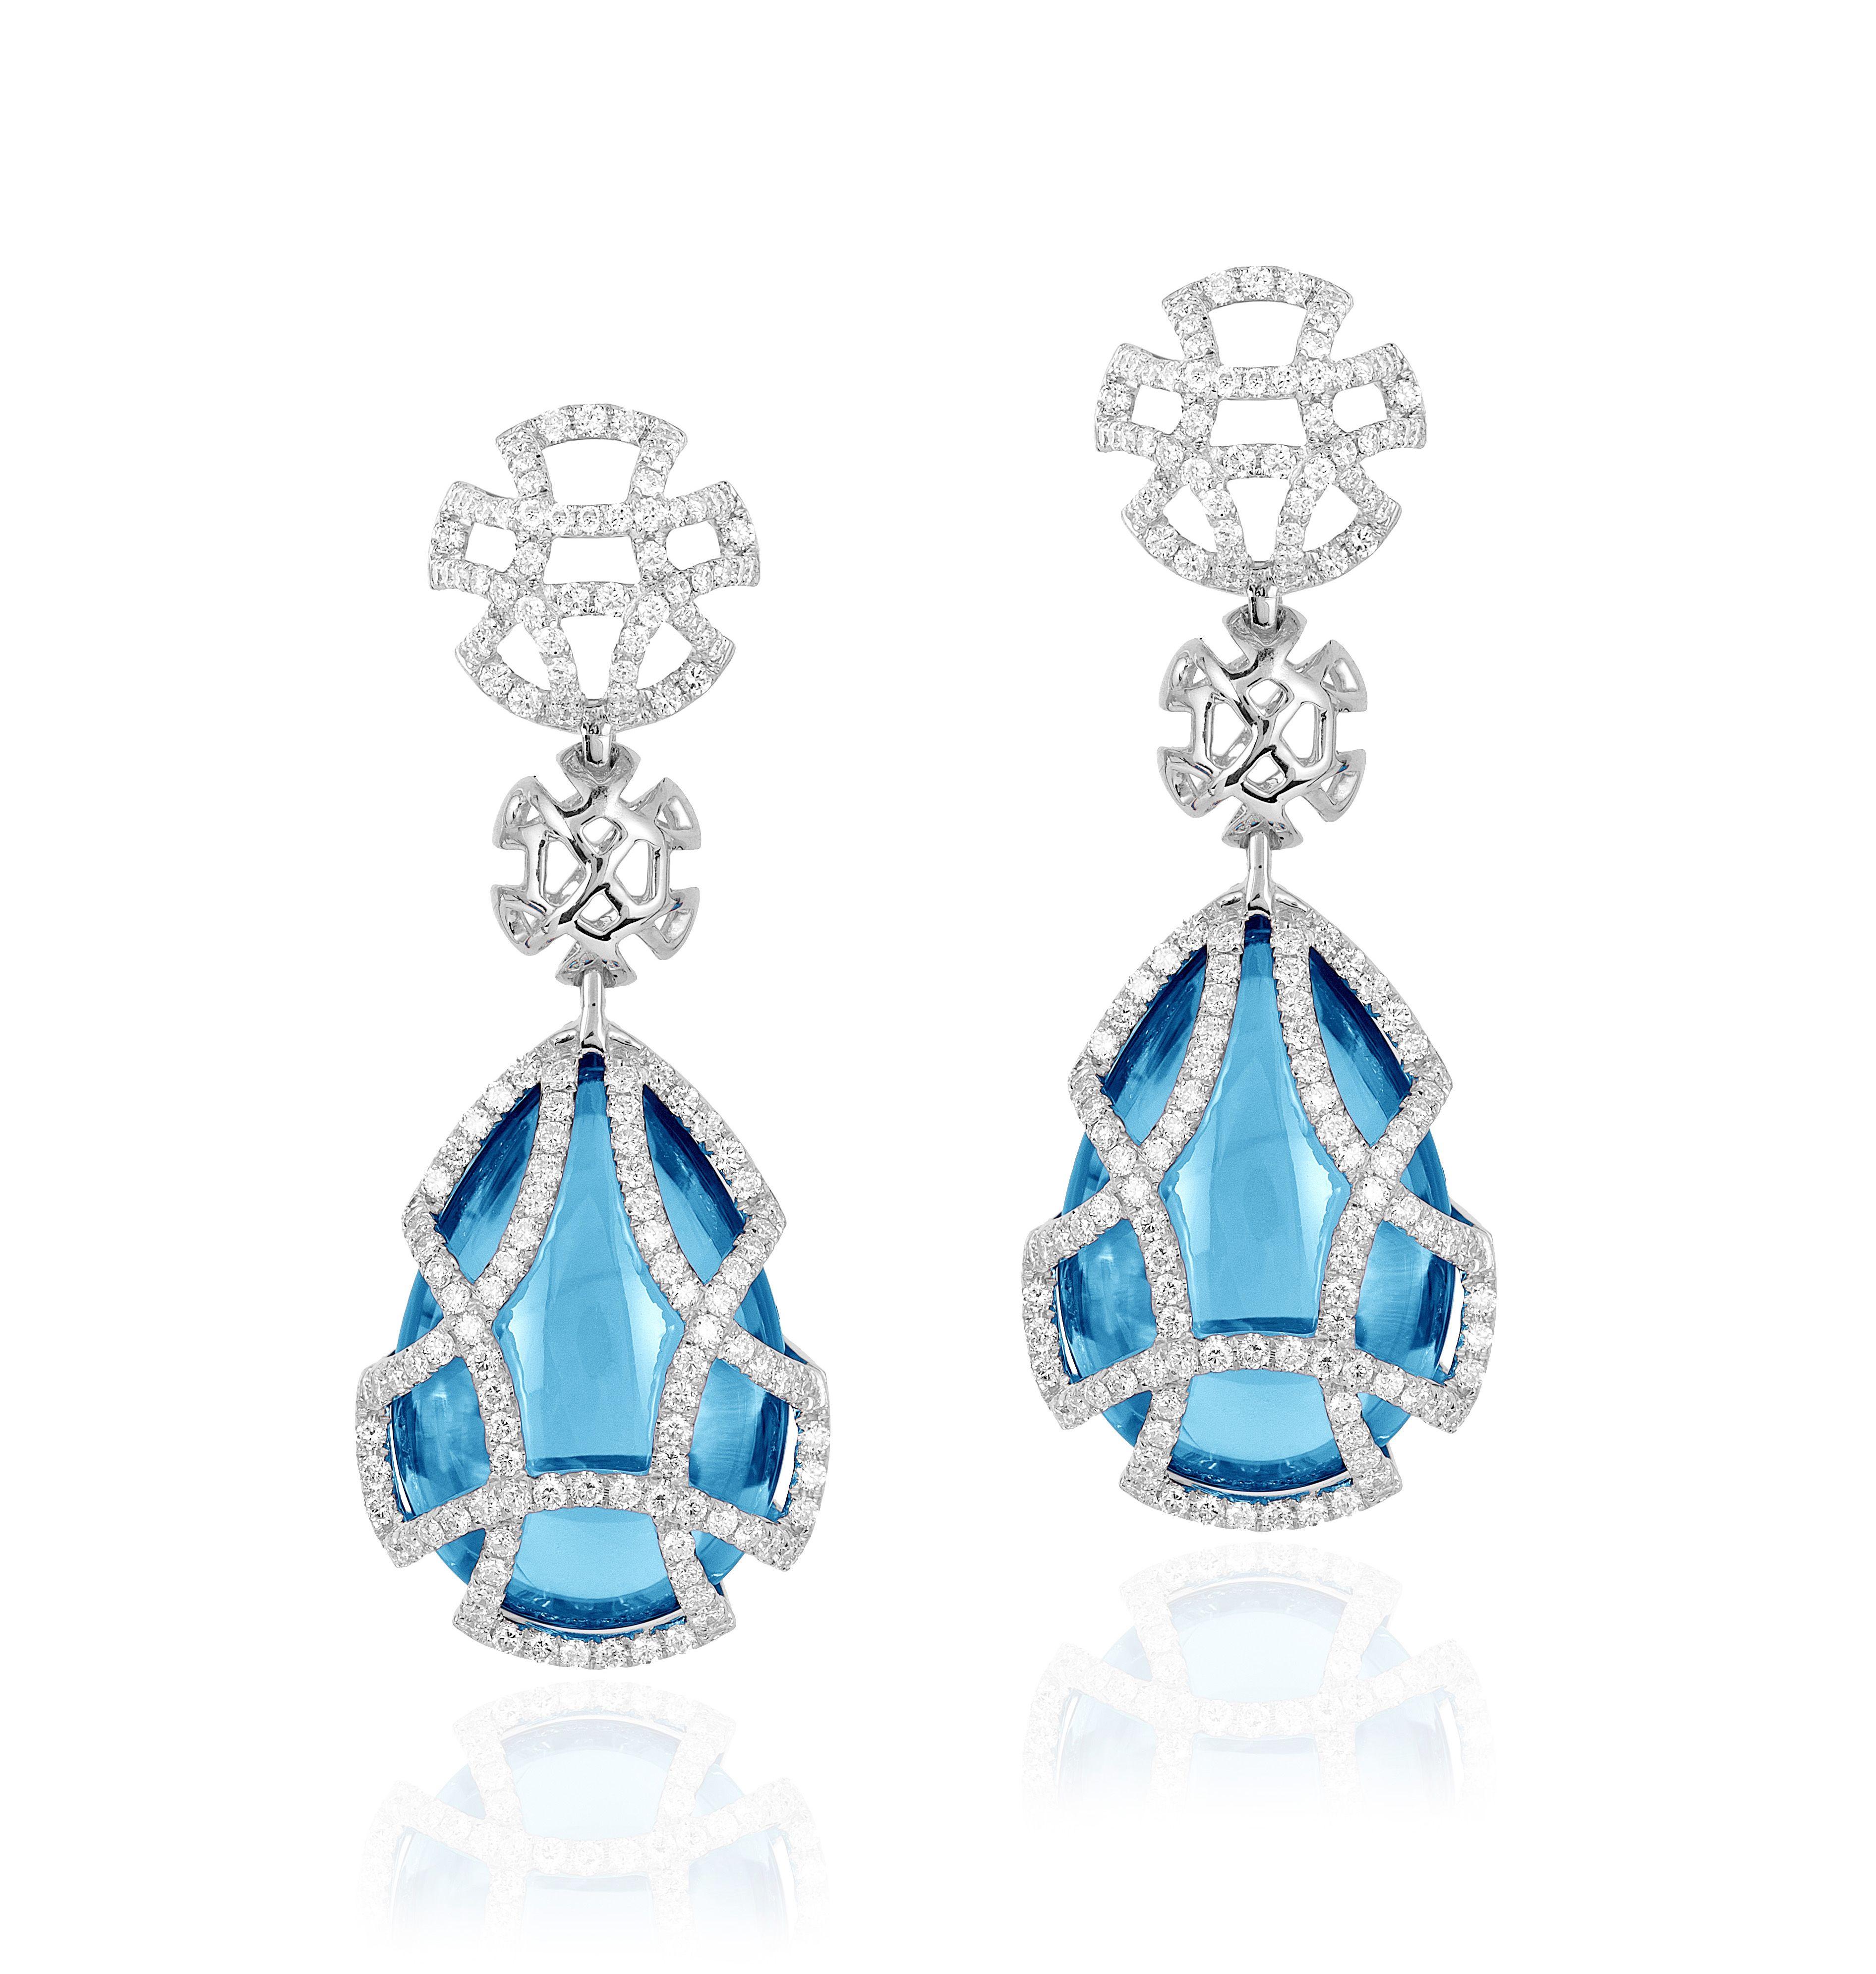 Blue Topaz Teardrop Cage Earring with Diamonds in 18K Yellow Gold from 'Freedom